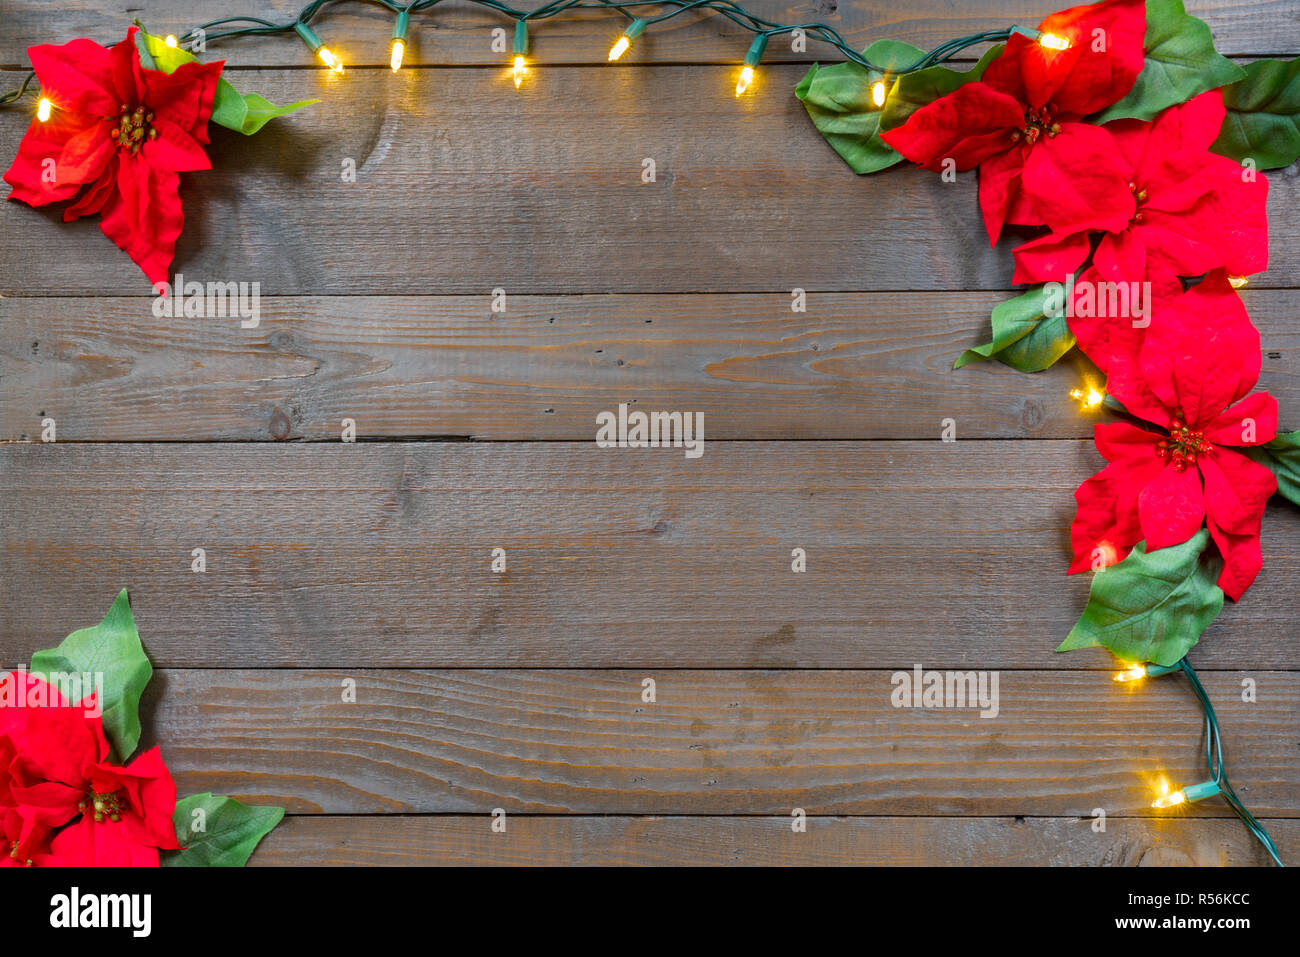 Christmas poinsettia flowers on wooden planks background with lights Stock Photo